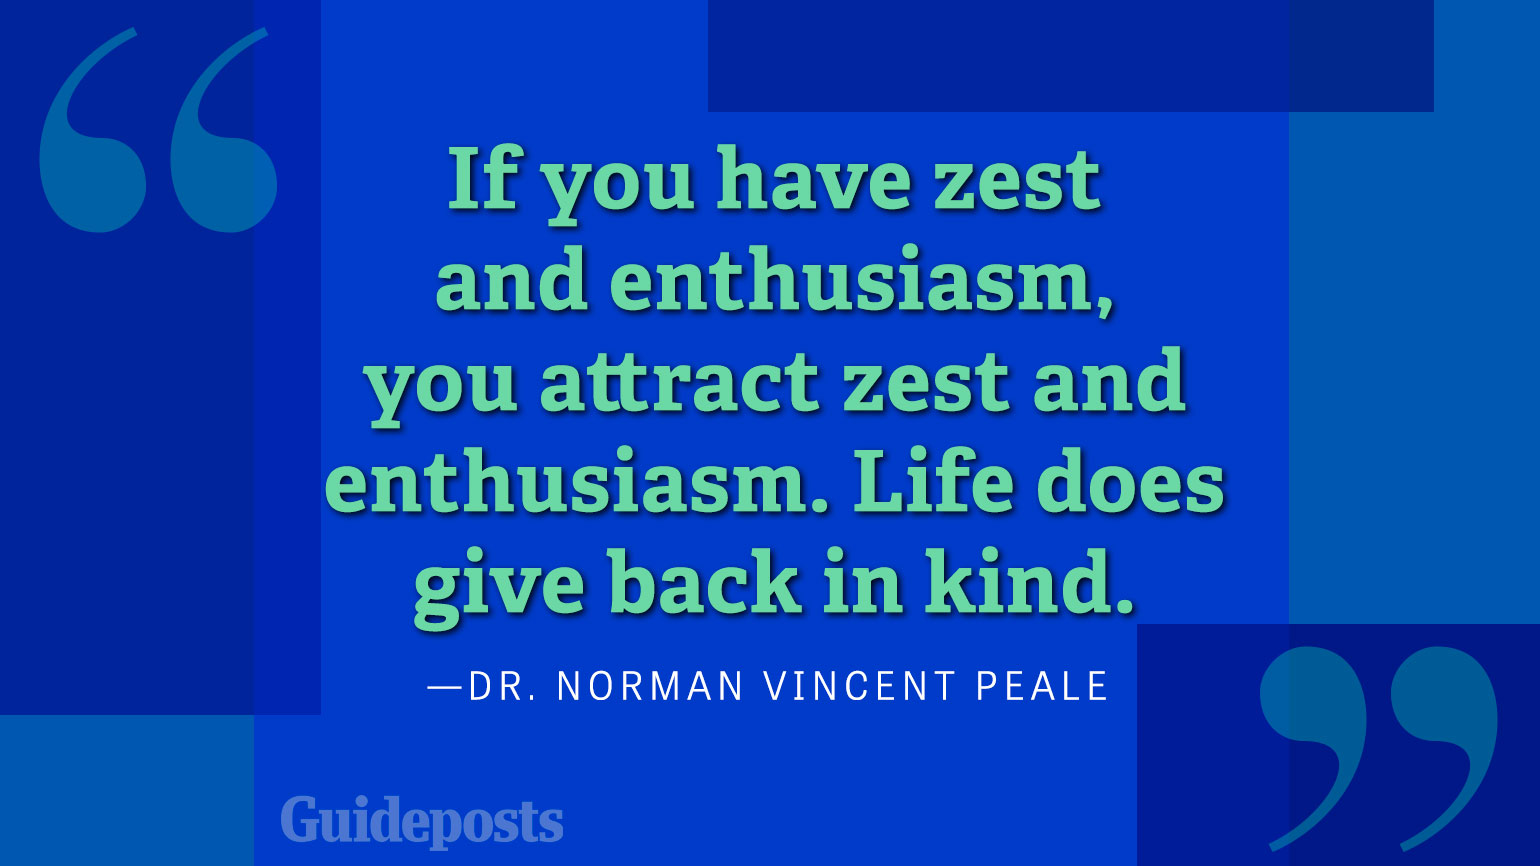 If you have zest and enthusiasm, you attract zest and enthusiasm. Life does give back in kind.